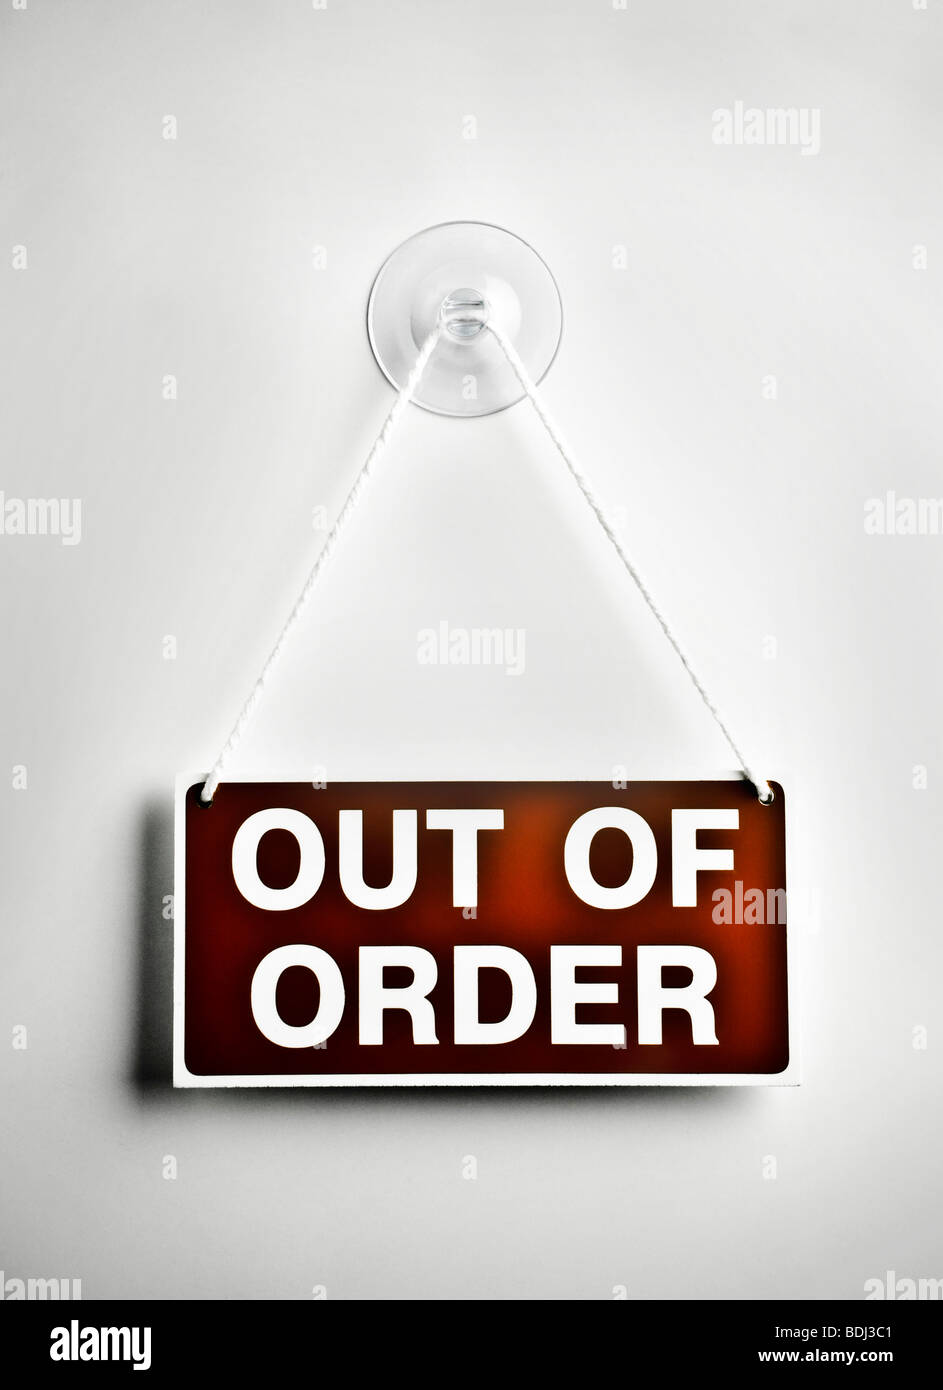 Out of order sign Stock Photo